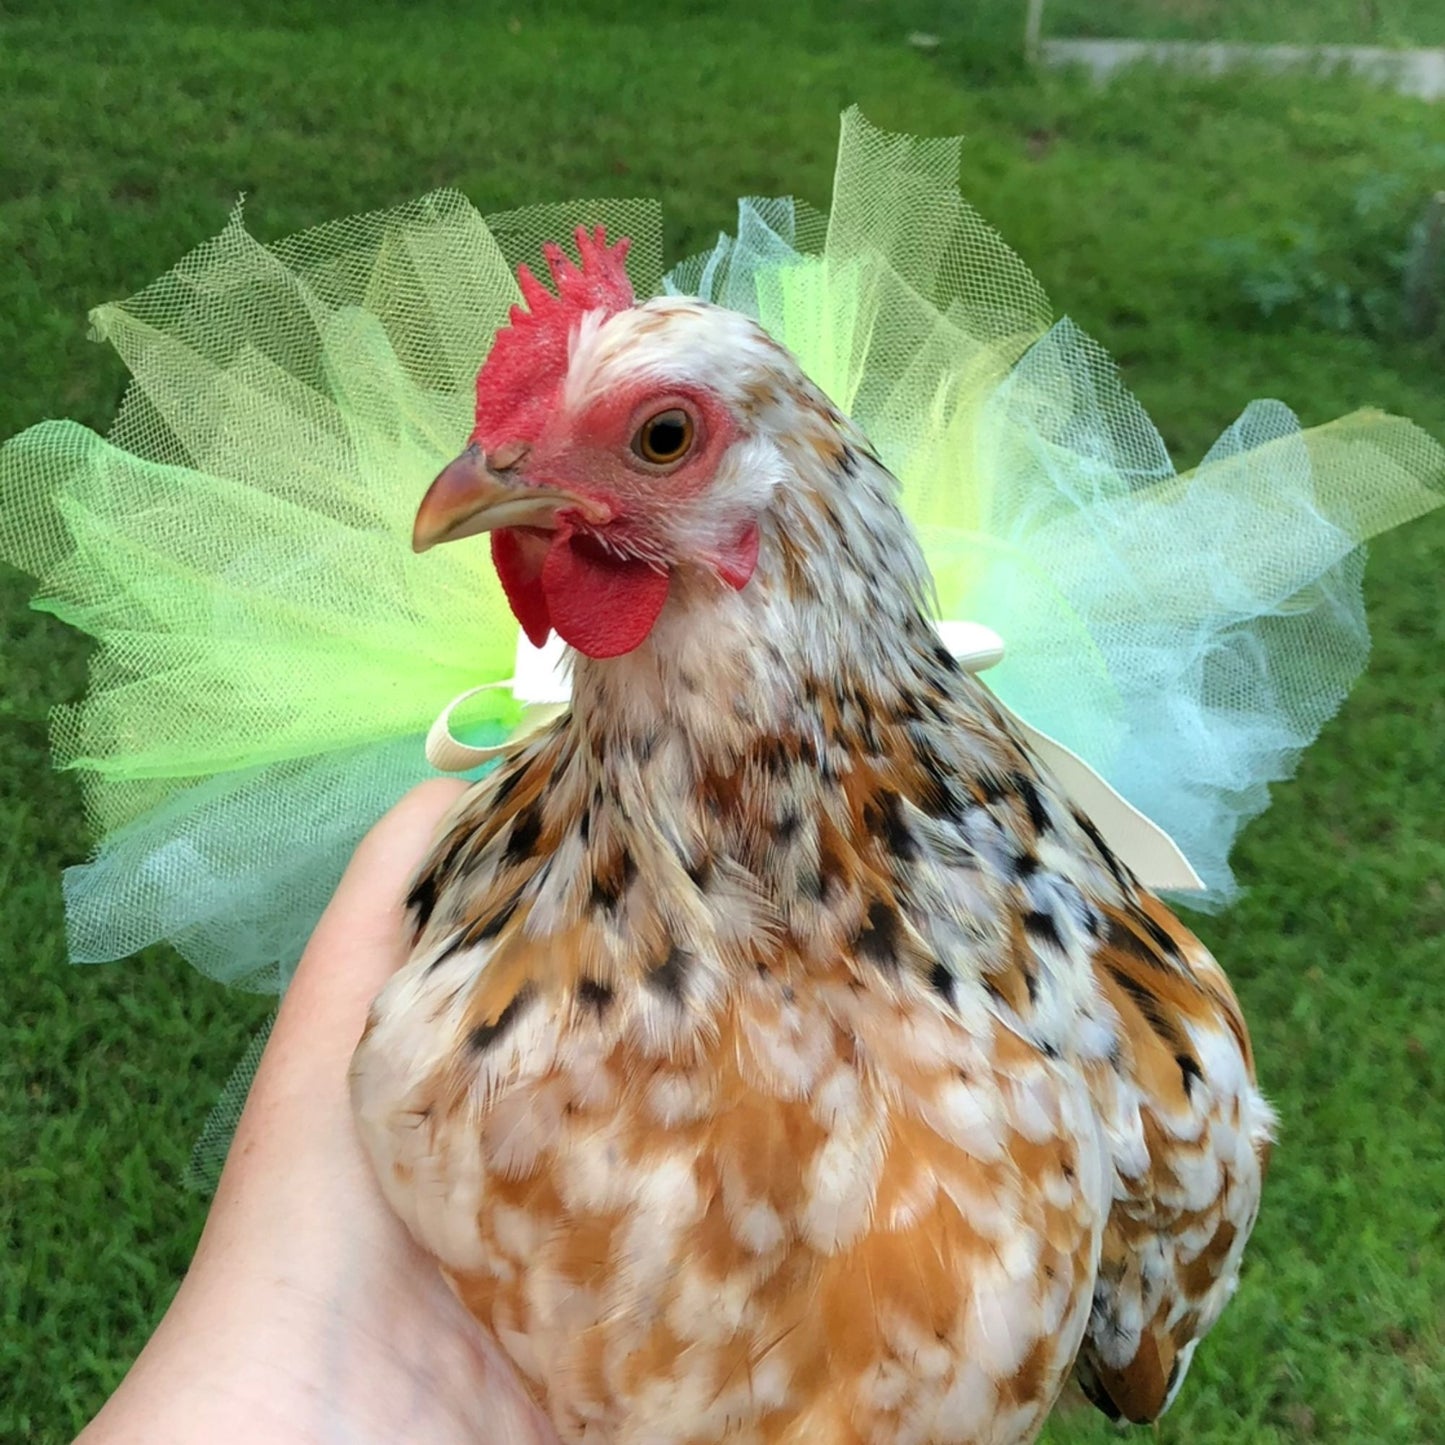 Calico Cochin Bantams are docile and look great in a chicken tutu!